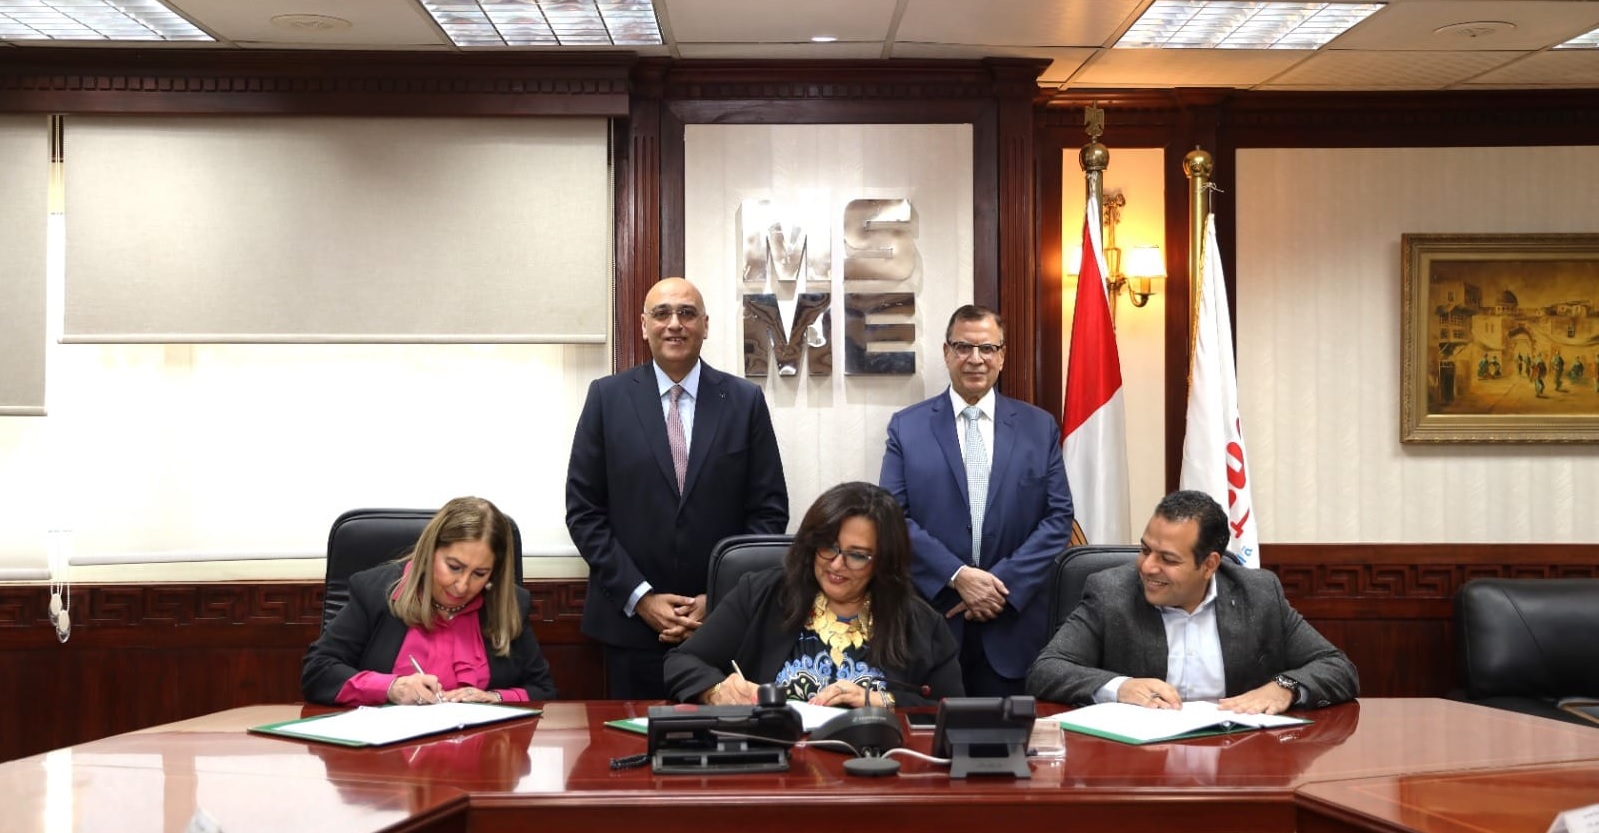 MSMEDA signs EGP 30M with Al Khair Microfinance to fund micro-projects in Egypt

